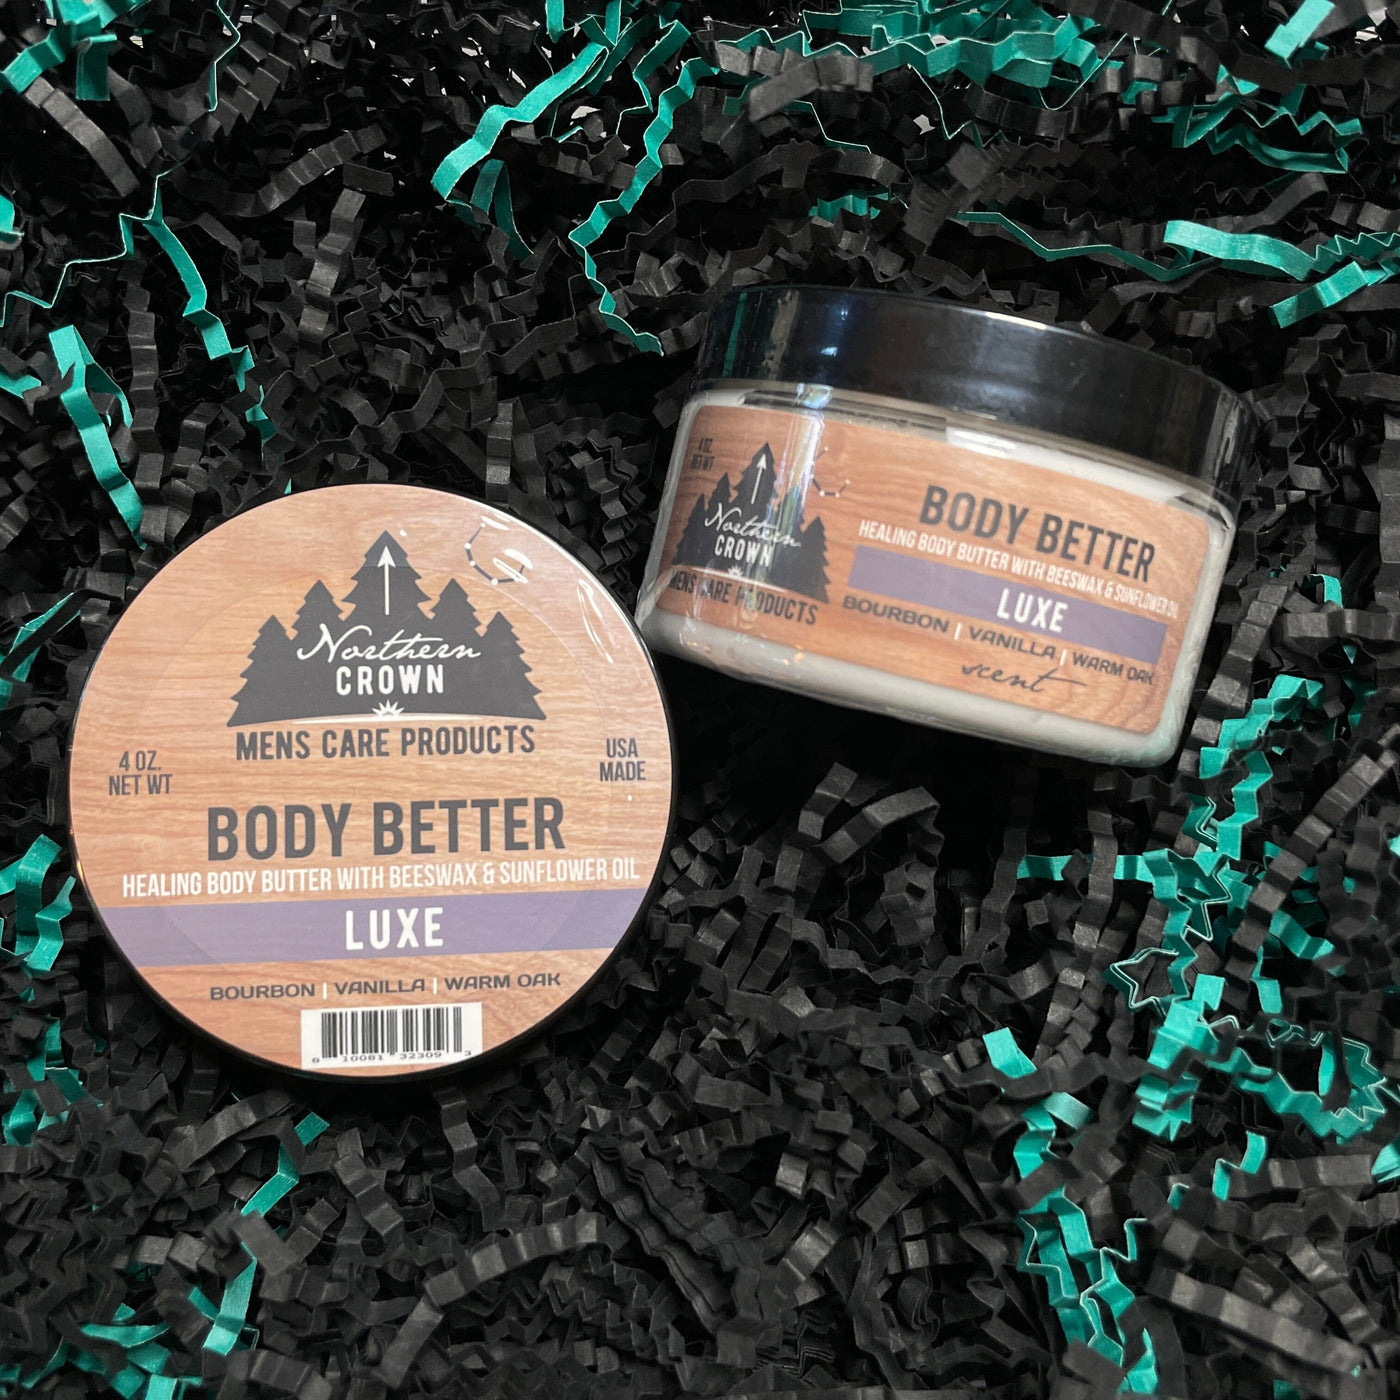 Your Own Beeswax Body Butter The Teal Bandit Luxe 